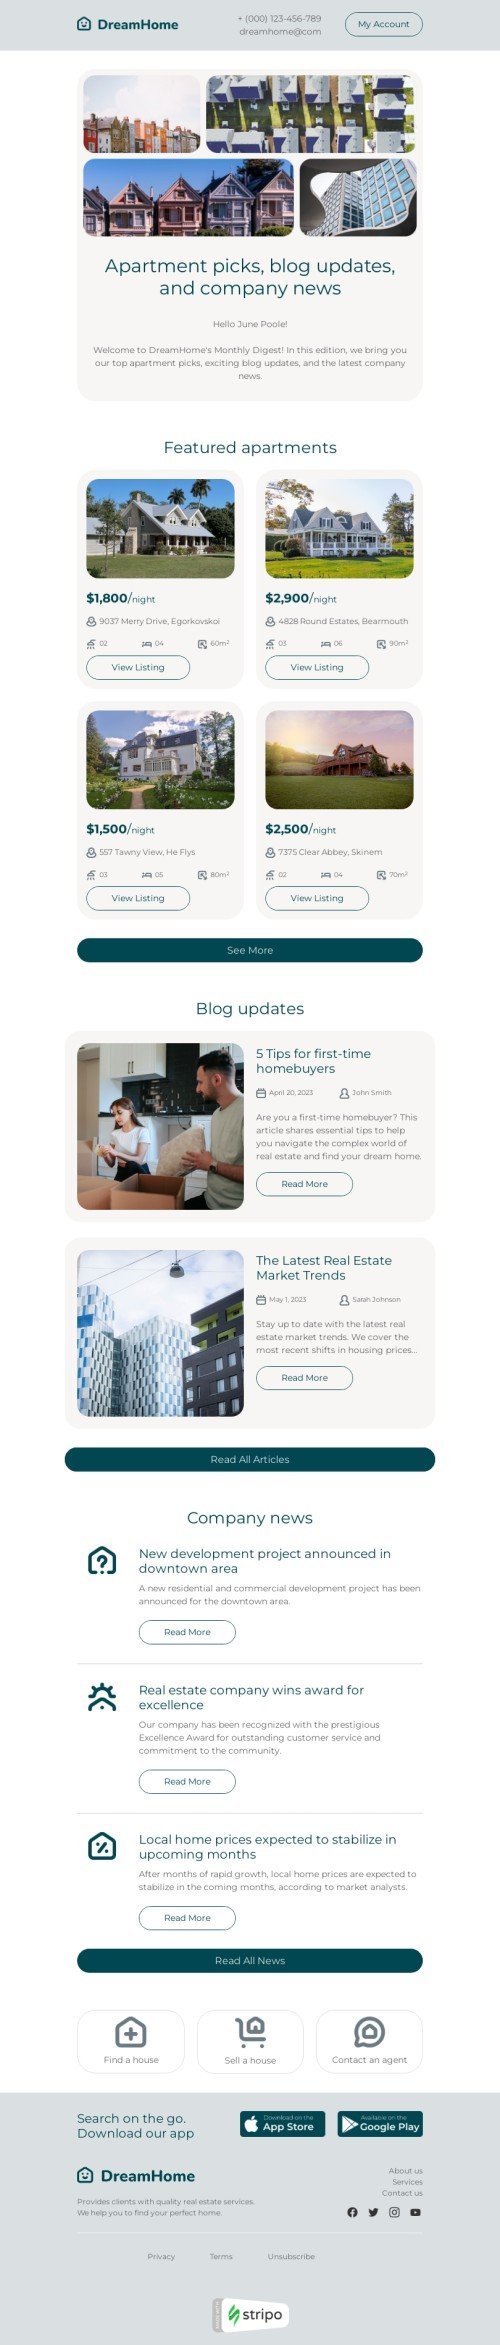 Newsletters email template "Newsletter" for real estate industry desktop view